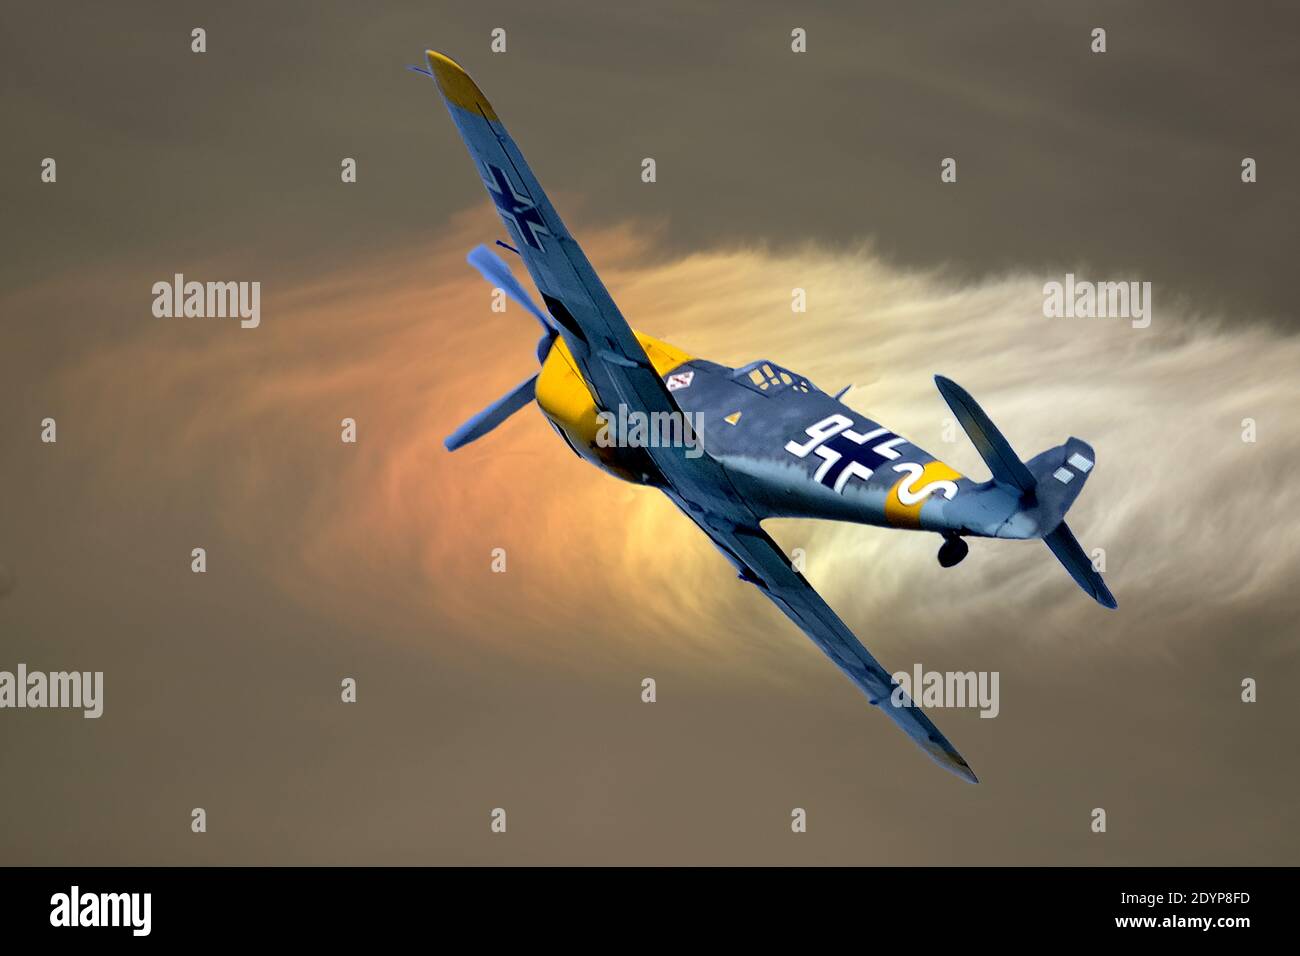 The Hispano Aviación HA-1109 and HA-1112 are licence-built versions of the Messerschmitt Bf 109G-2 developed in Spain during and after World War II Stock Photo